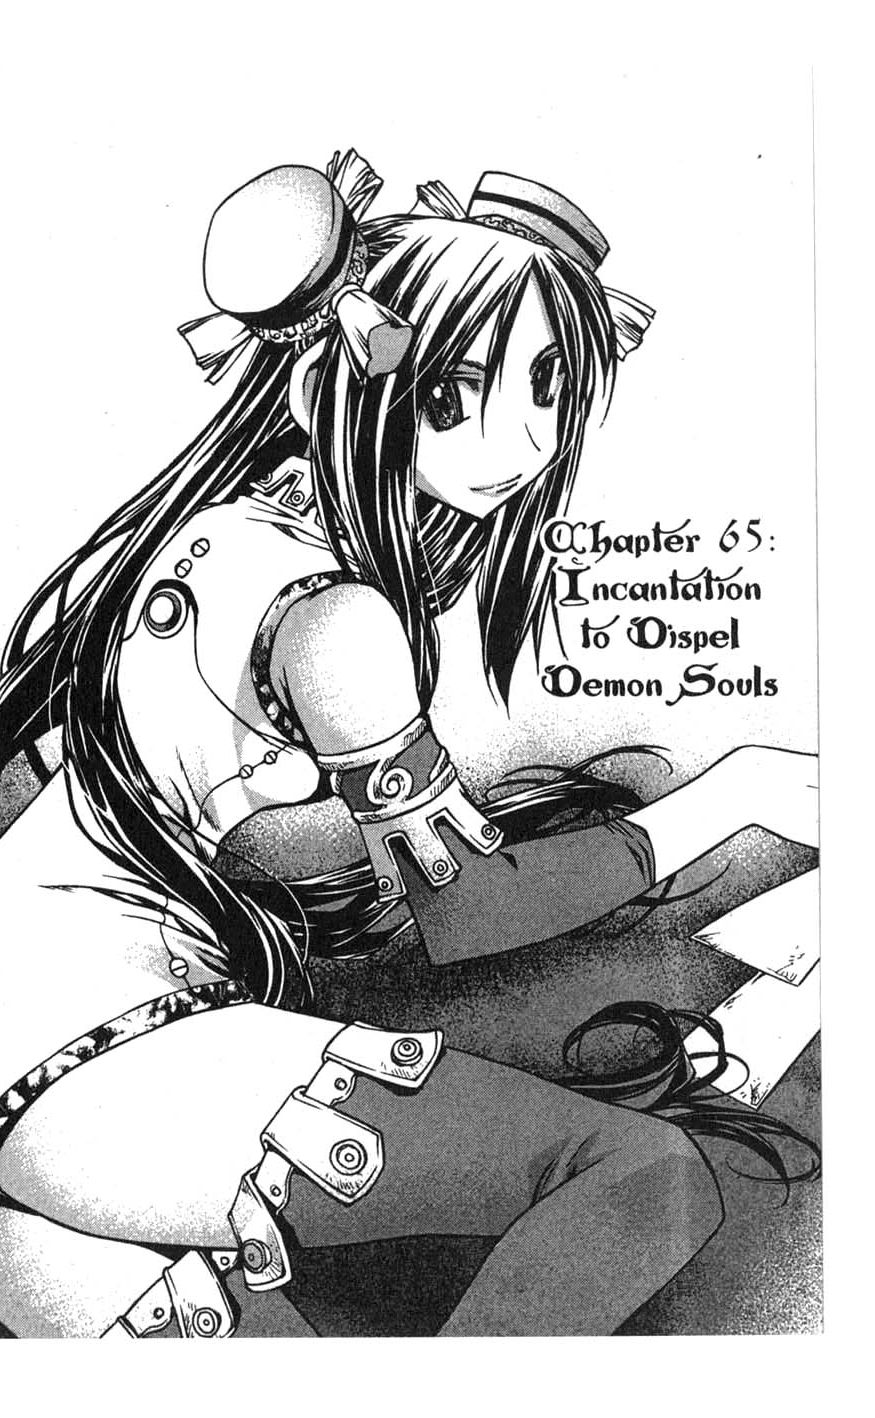 Chronicles of the Cursed Sword Vol. 16 Ch. 65 Incantation to Dispel Demon Souls